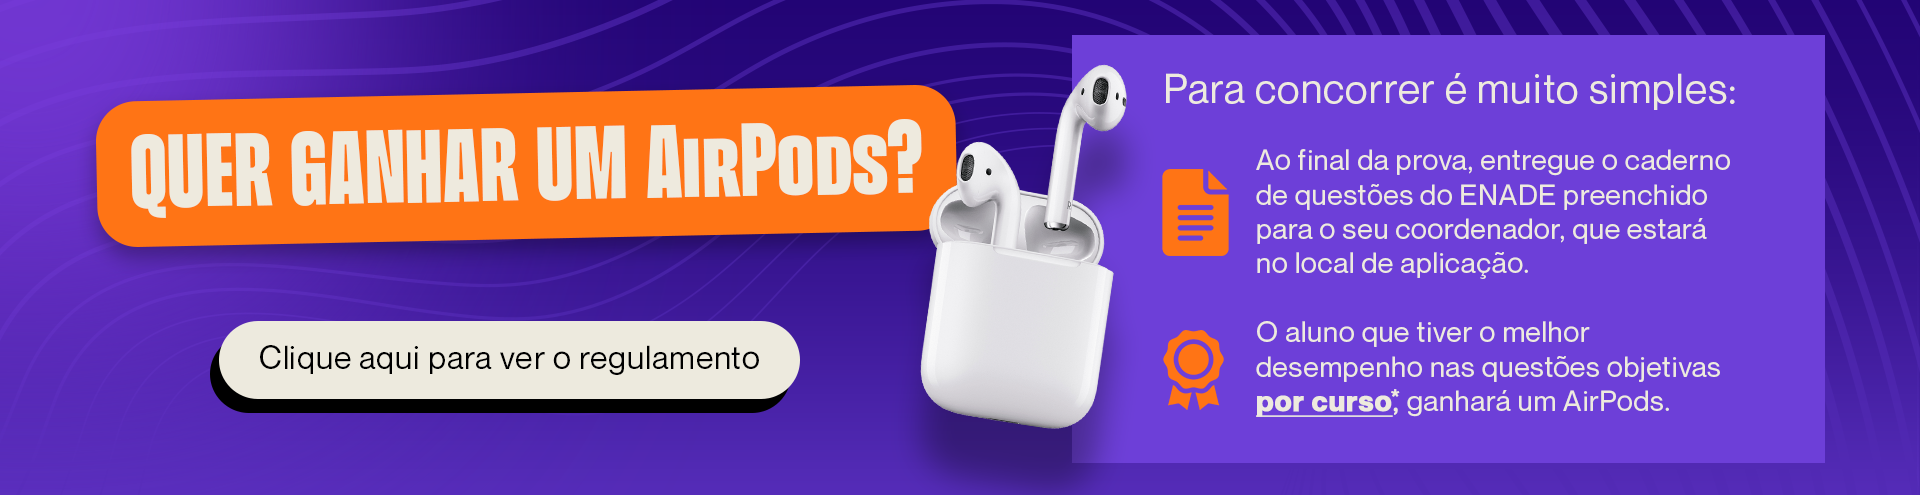 Banner airpods